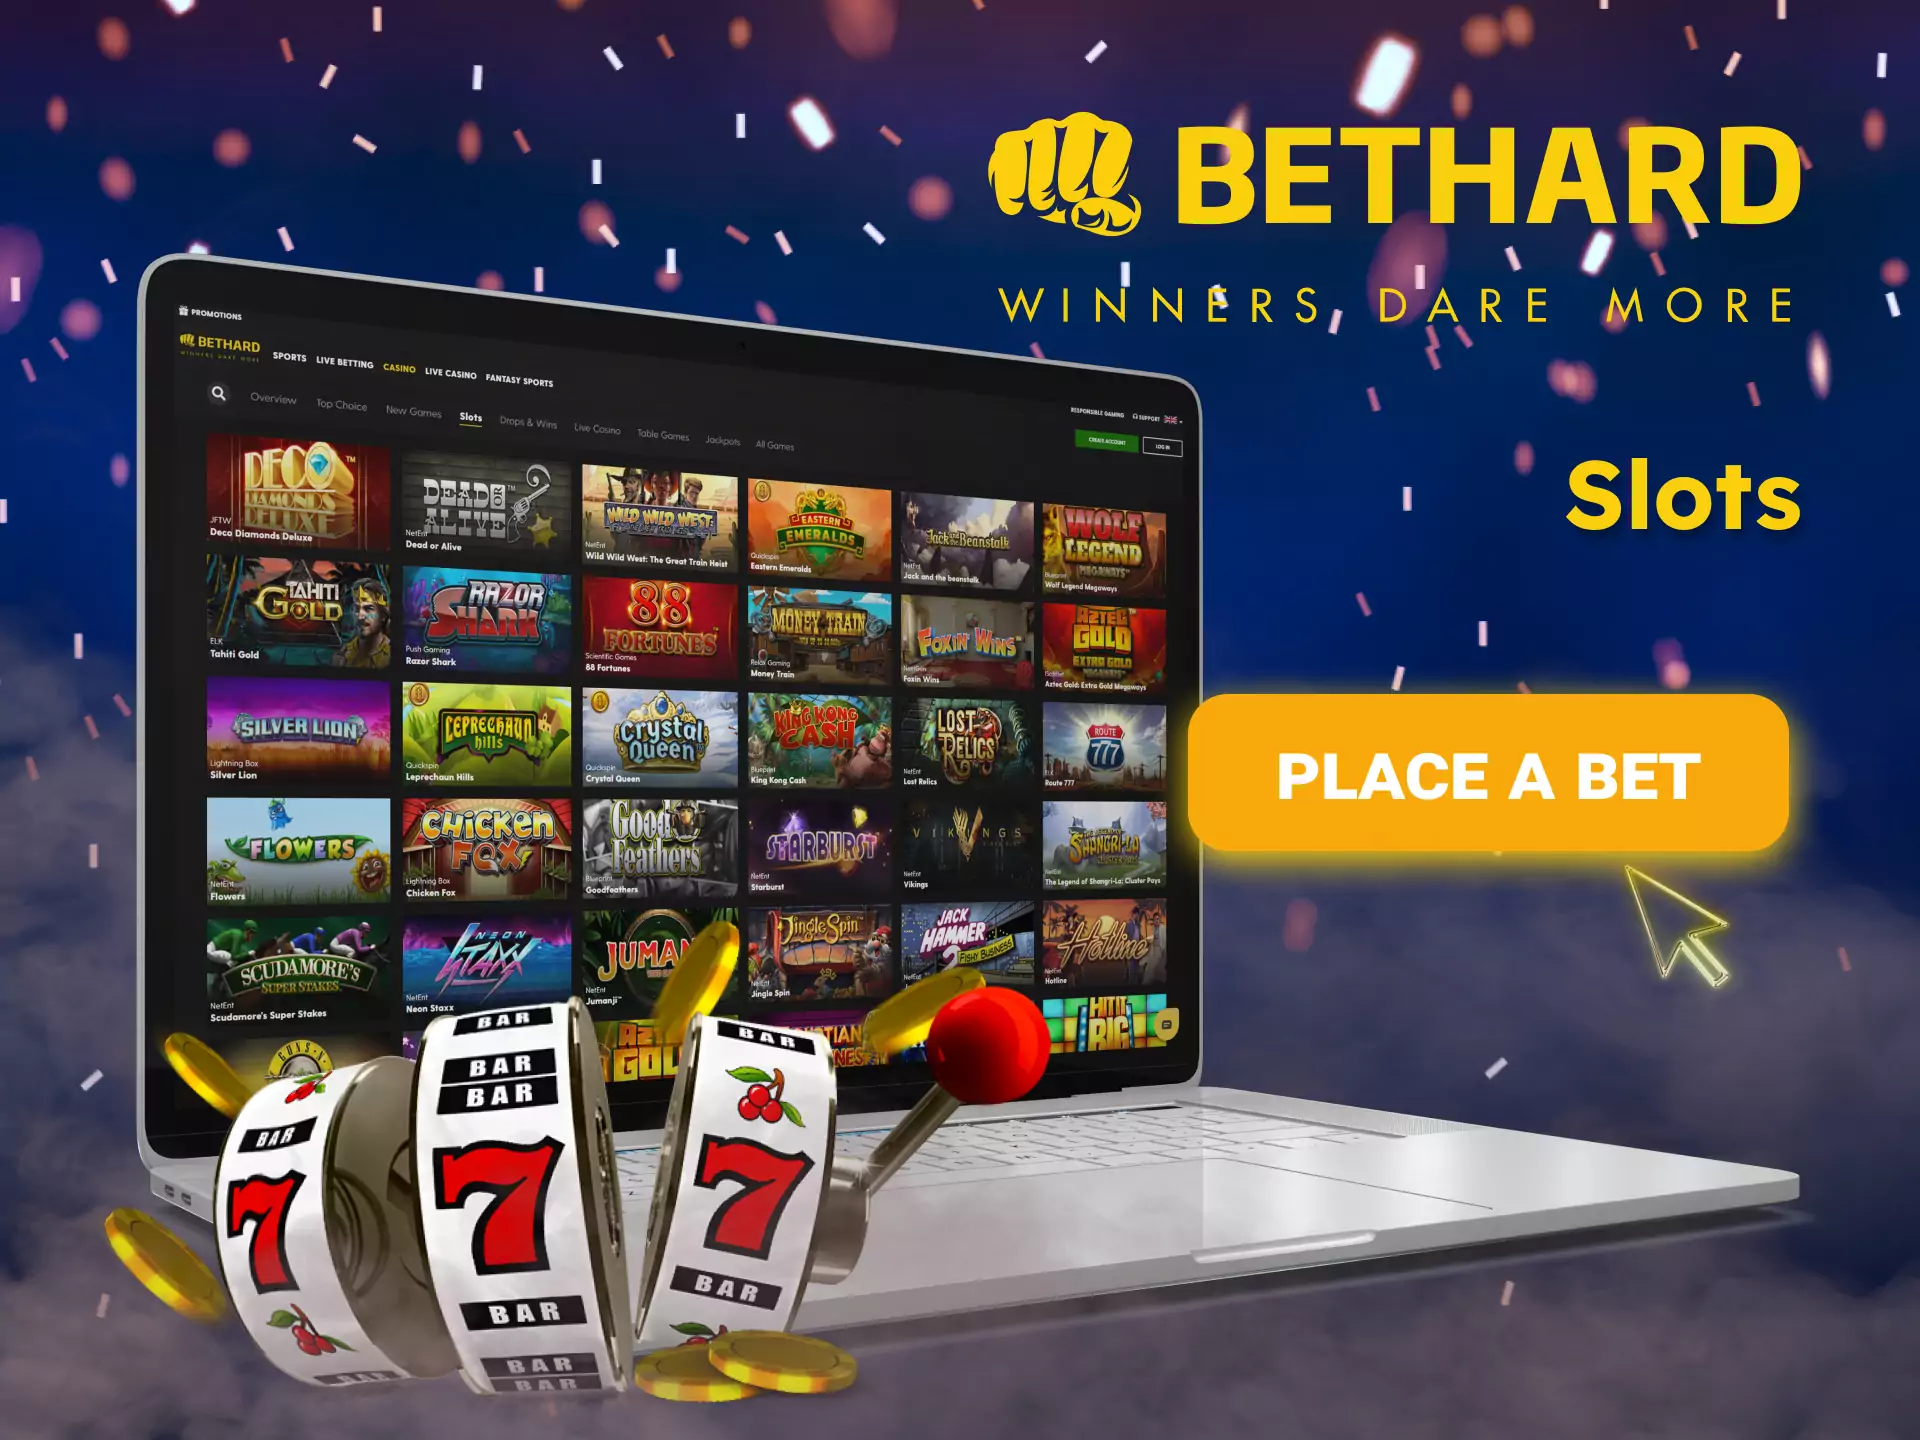 Try your luck in the game of slots with Bethard.